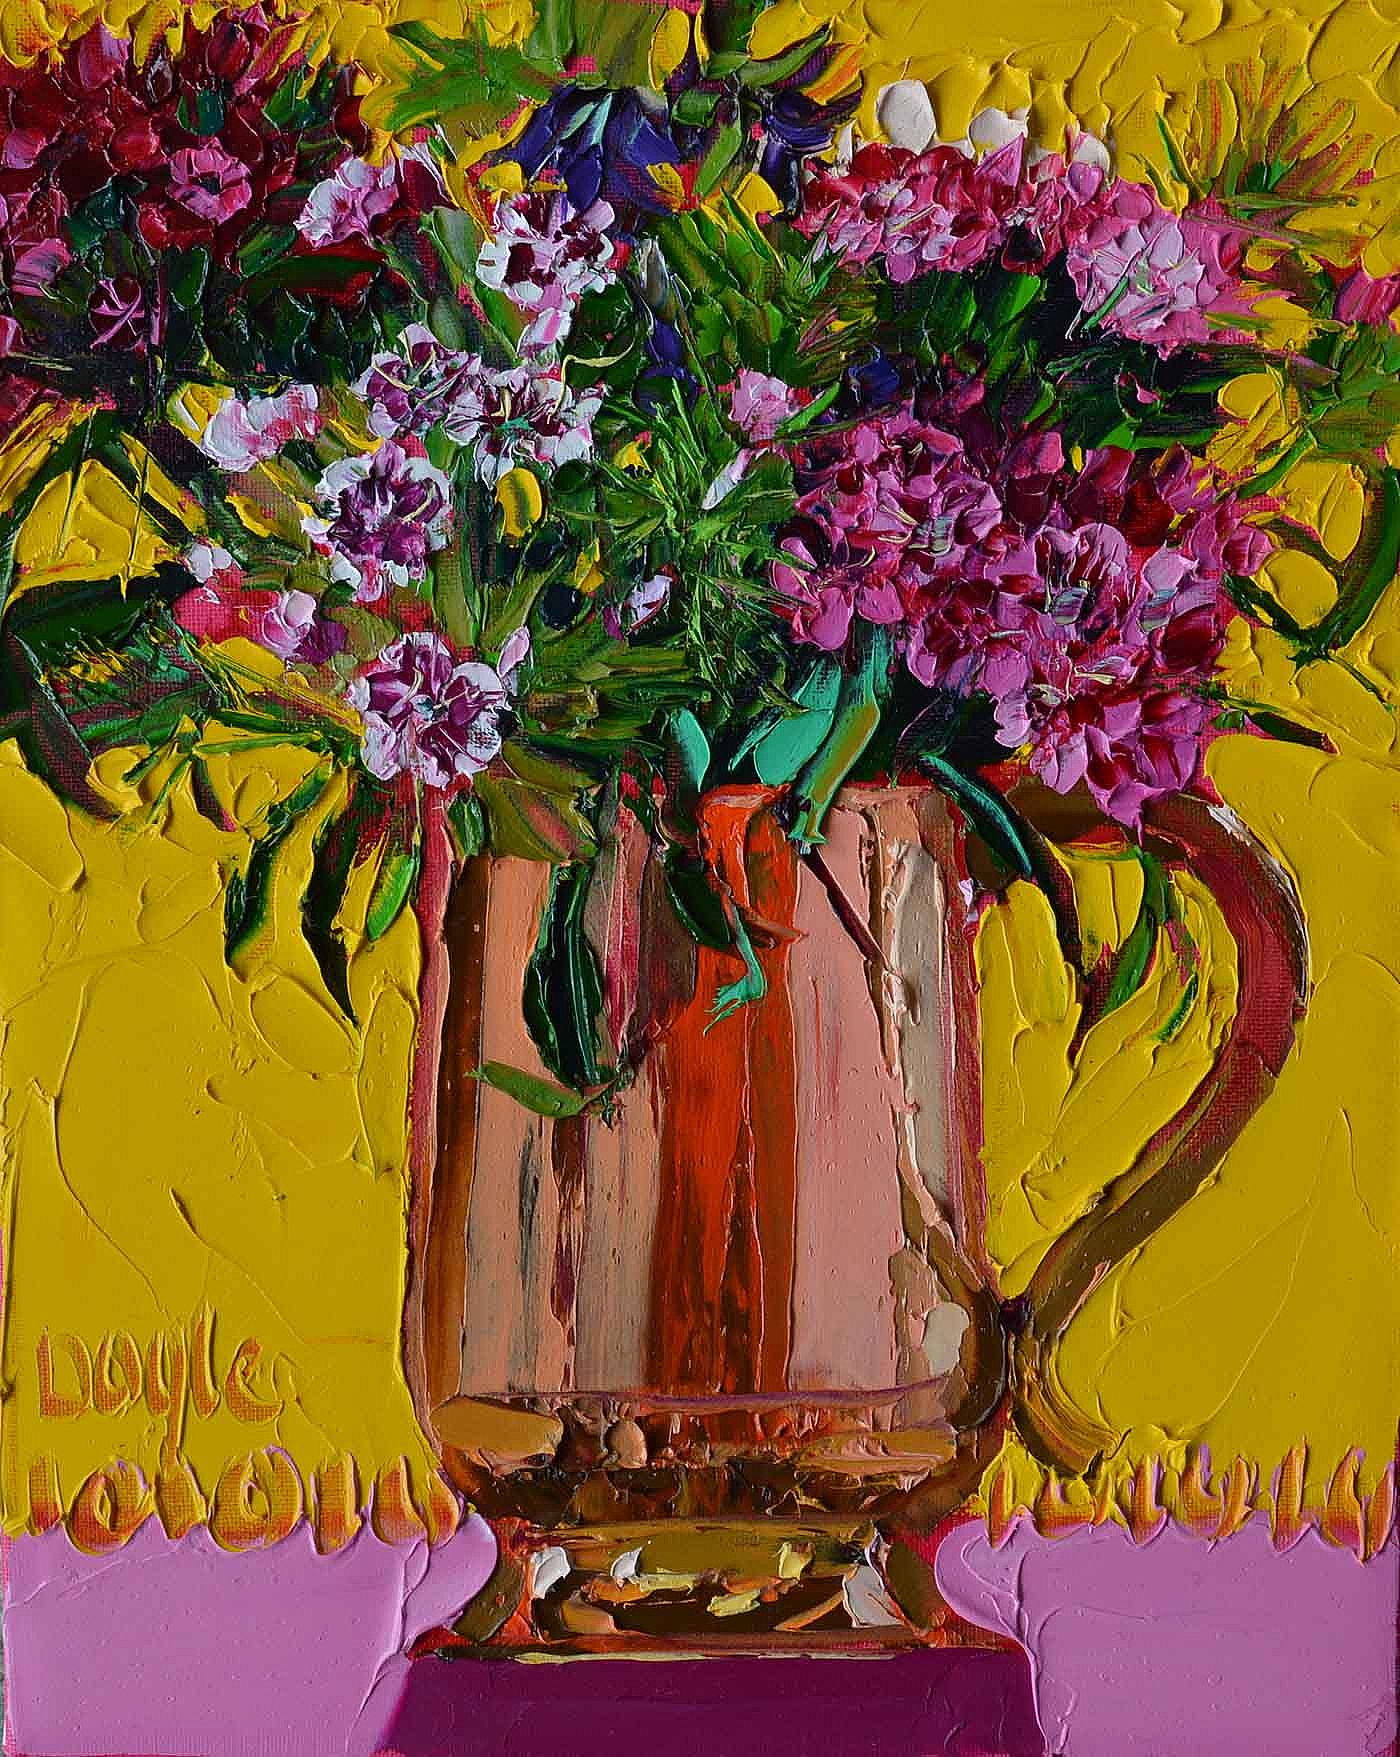 Pots and Posies 3 by Lucy Doyle